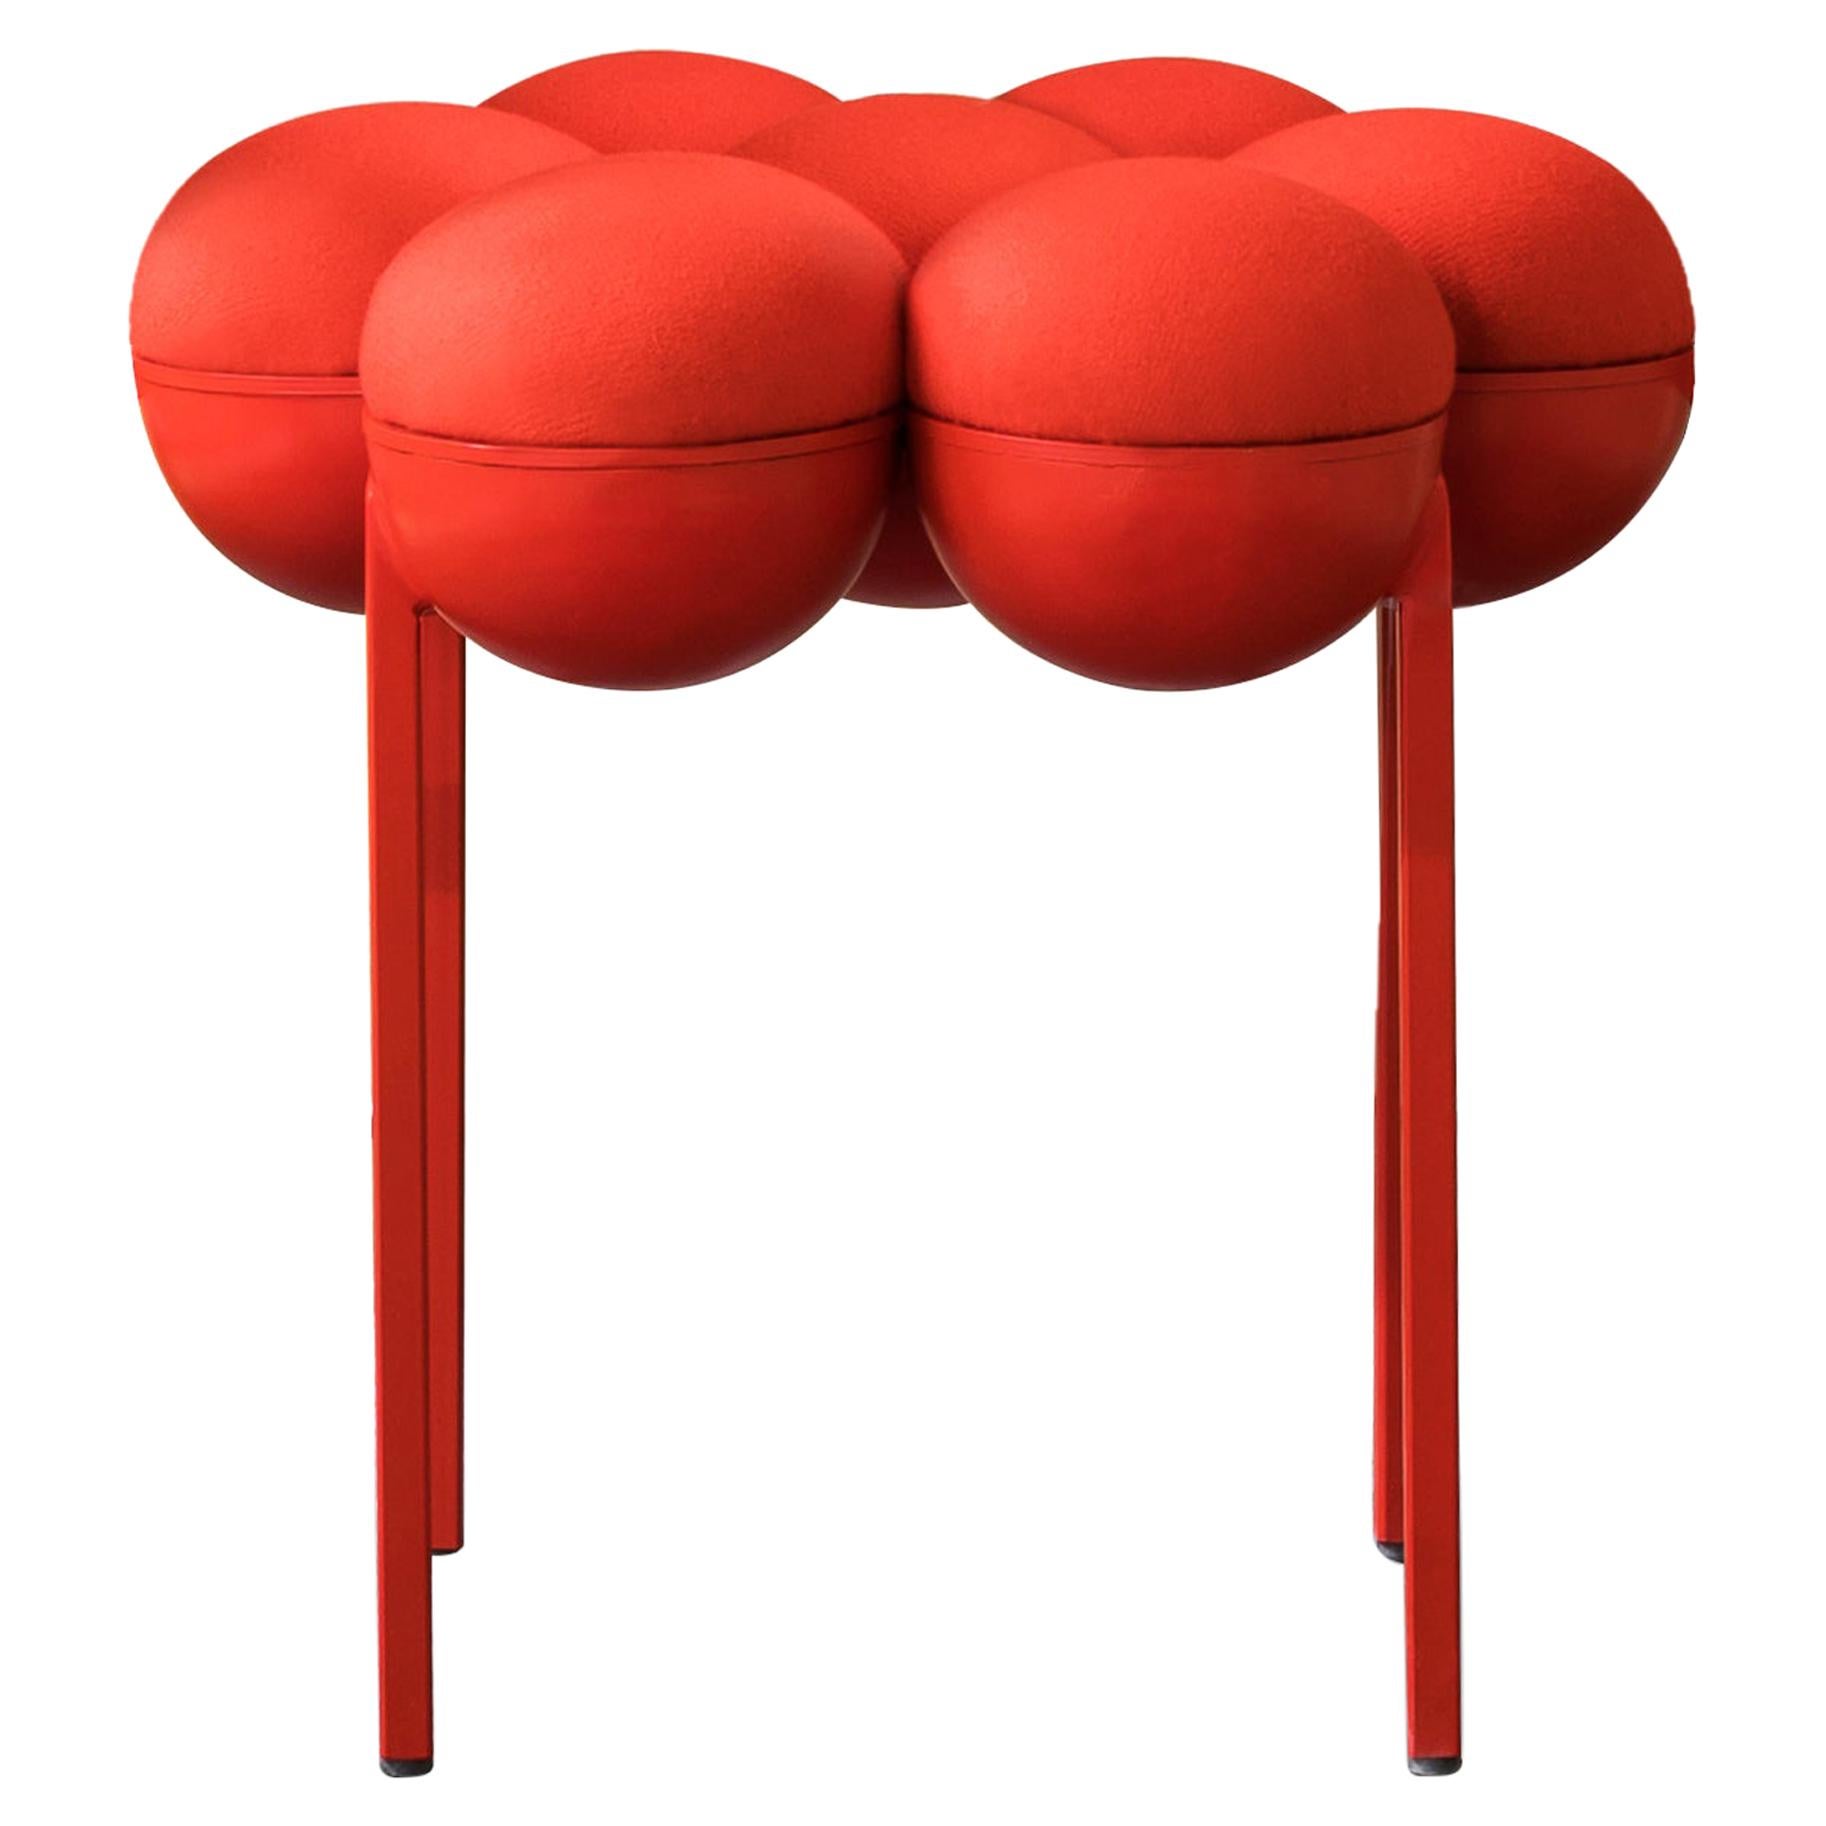 Saturn Pouffe Small, Red Coated Steel Frame and Red Wool by Lara Bohinc